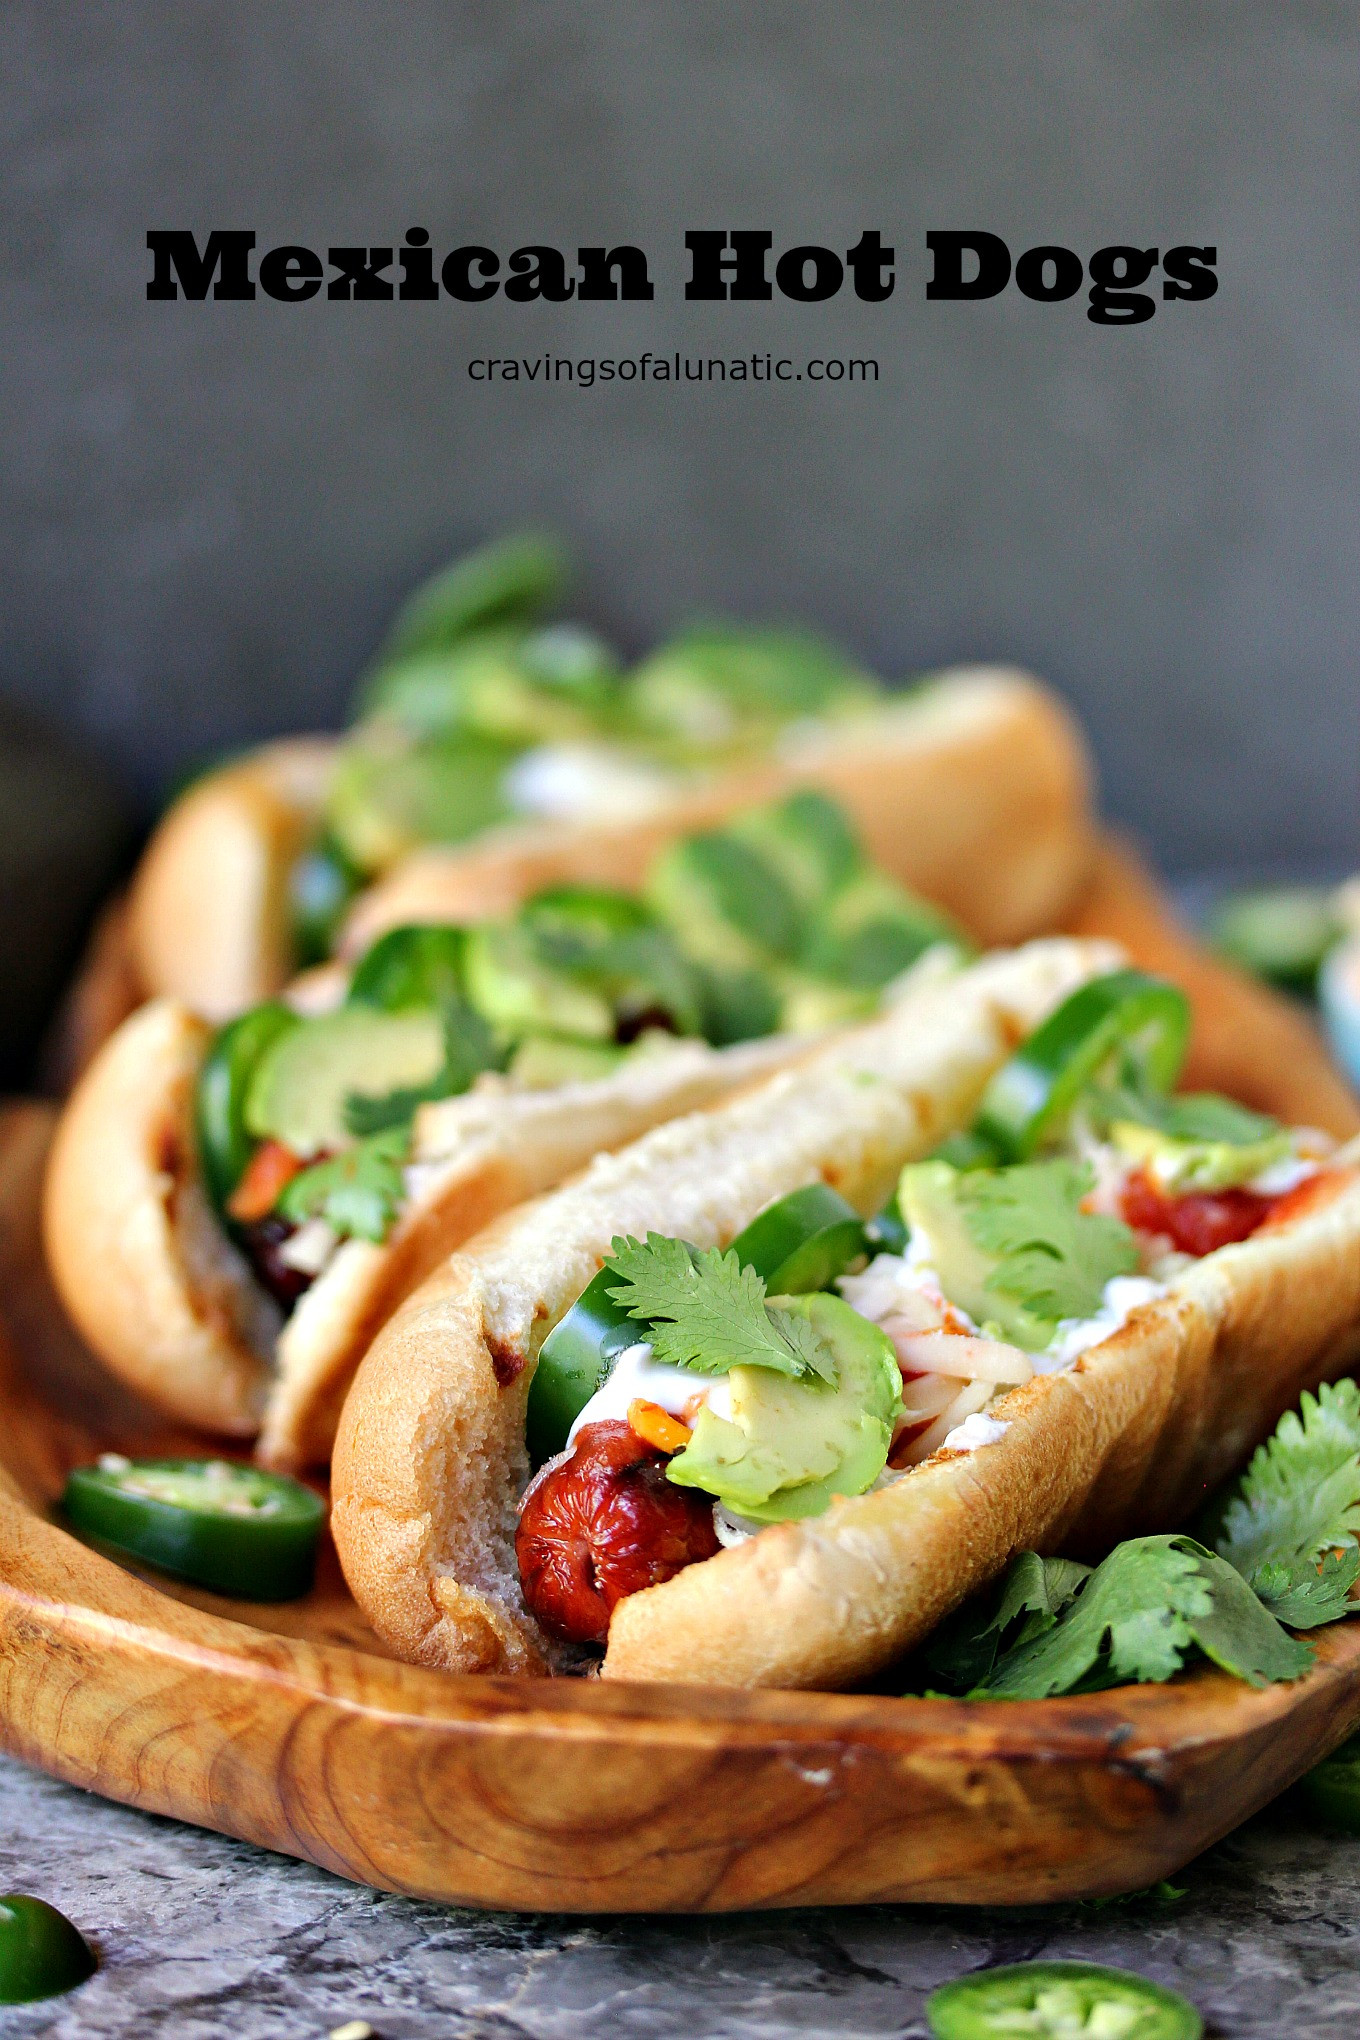 25 Of the Best Ideas for Hot Dogs Mexicanos - Home, Family, Style and ...